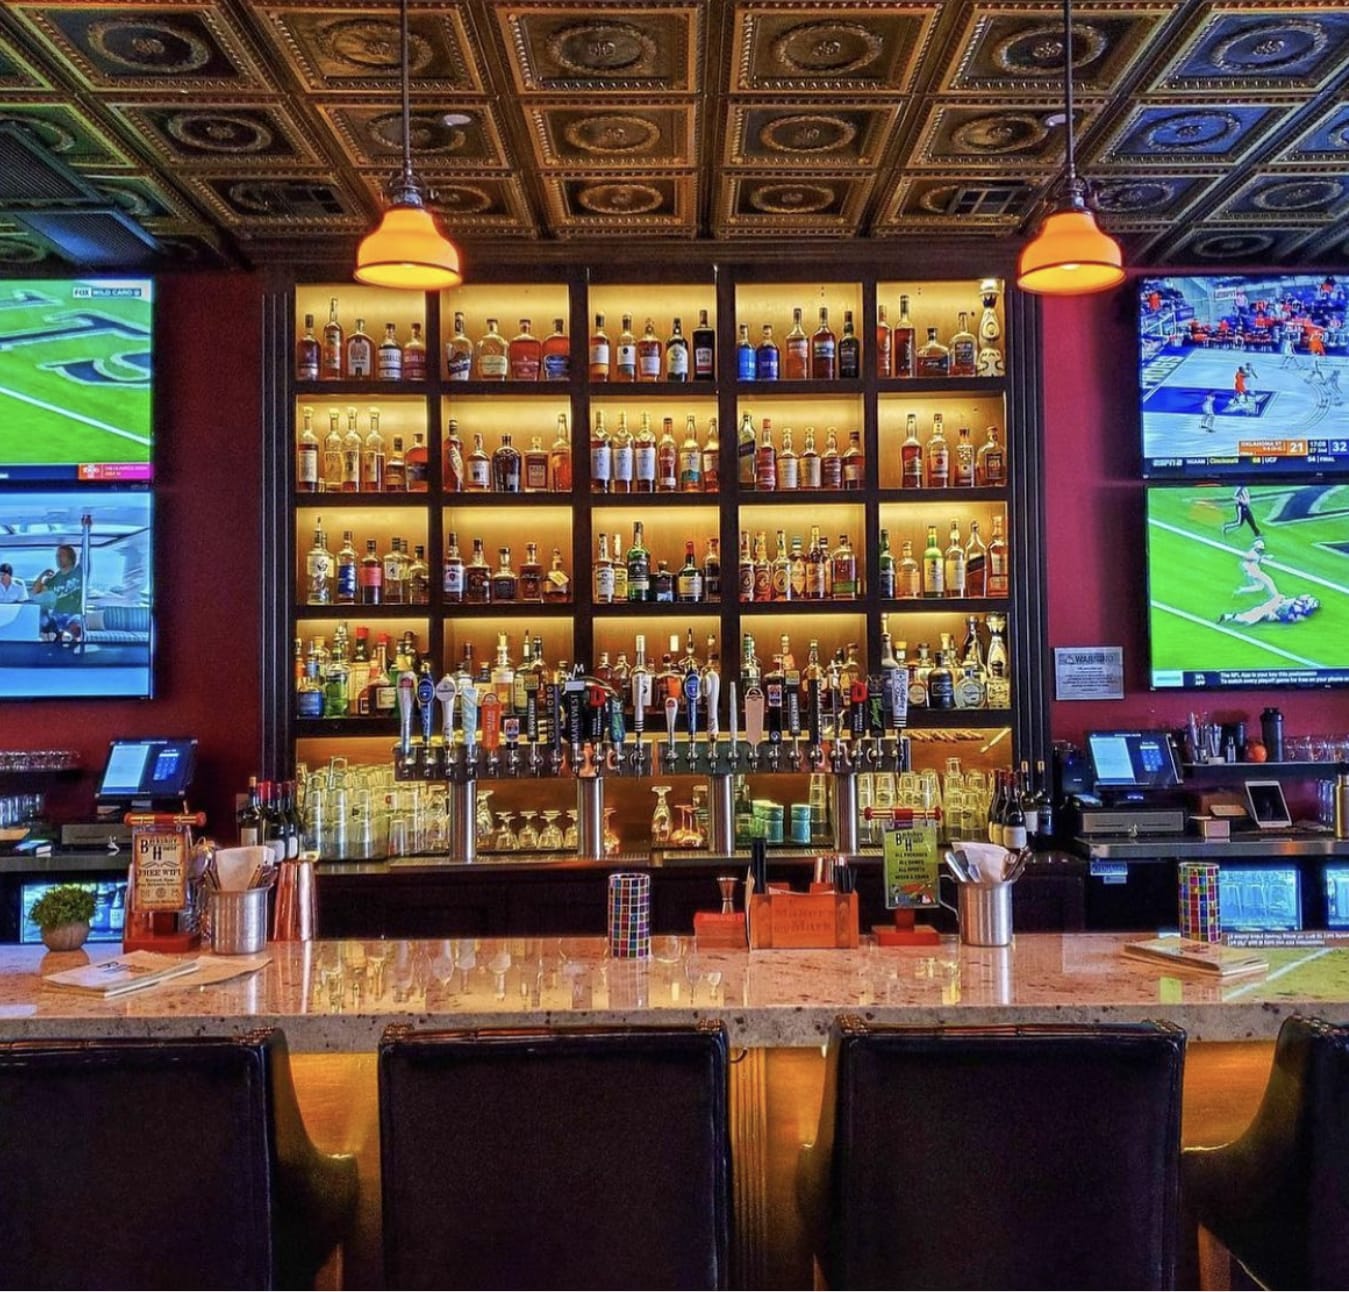 Woodlands best sports bars to watch college football, NFL games